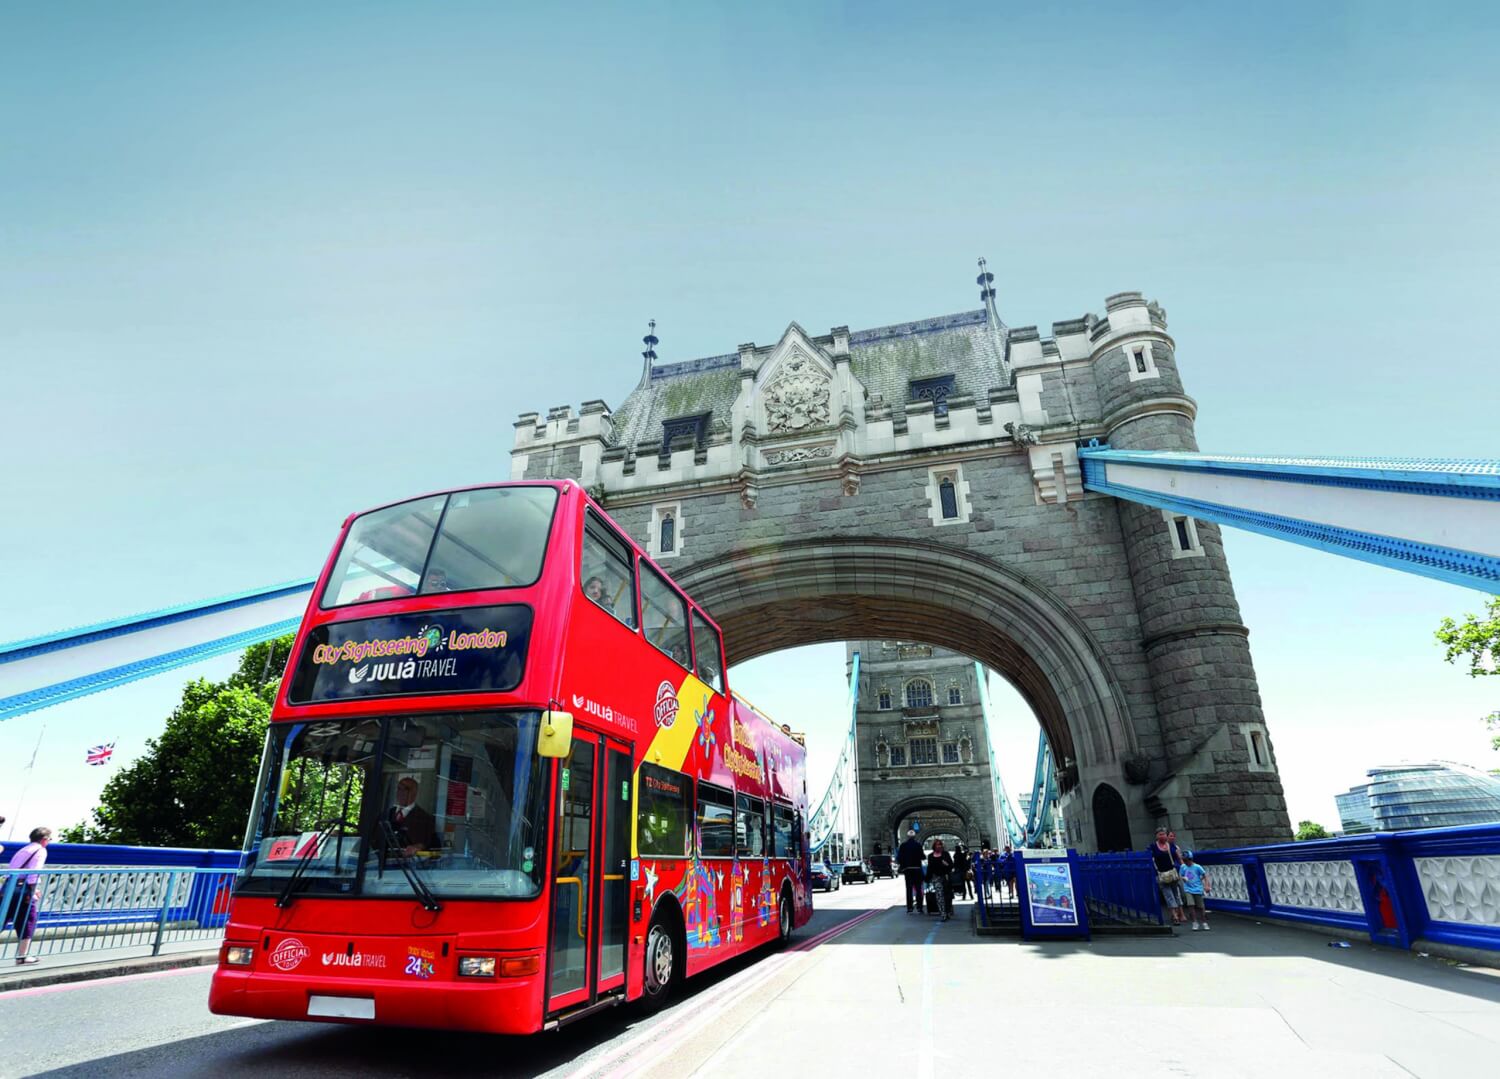 Stagecoach City Sightseeing London